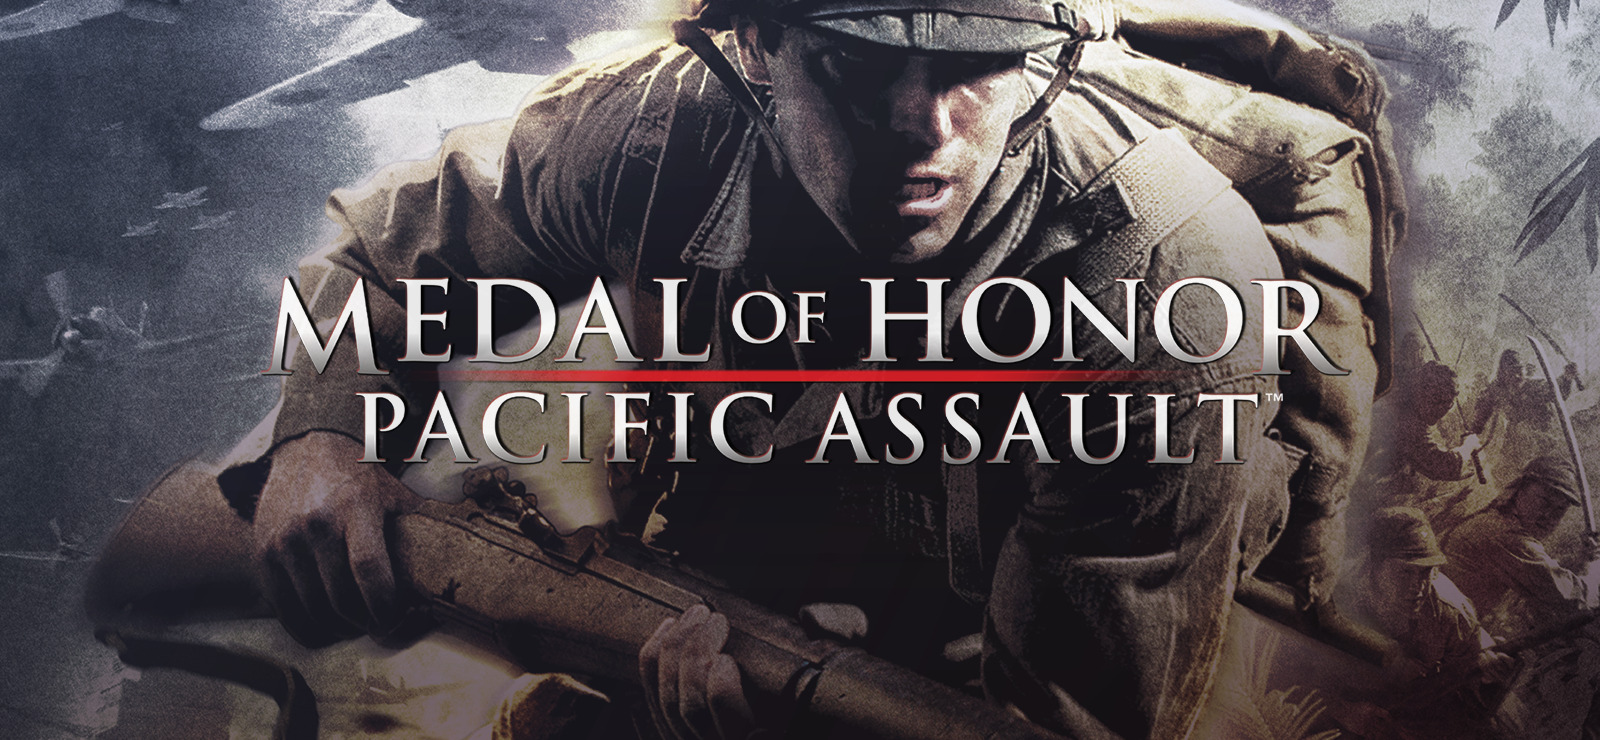 medal of honor game downloads